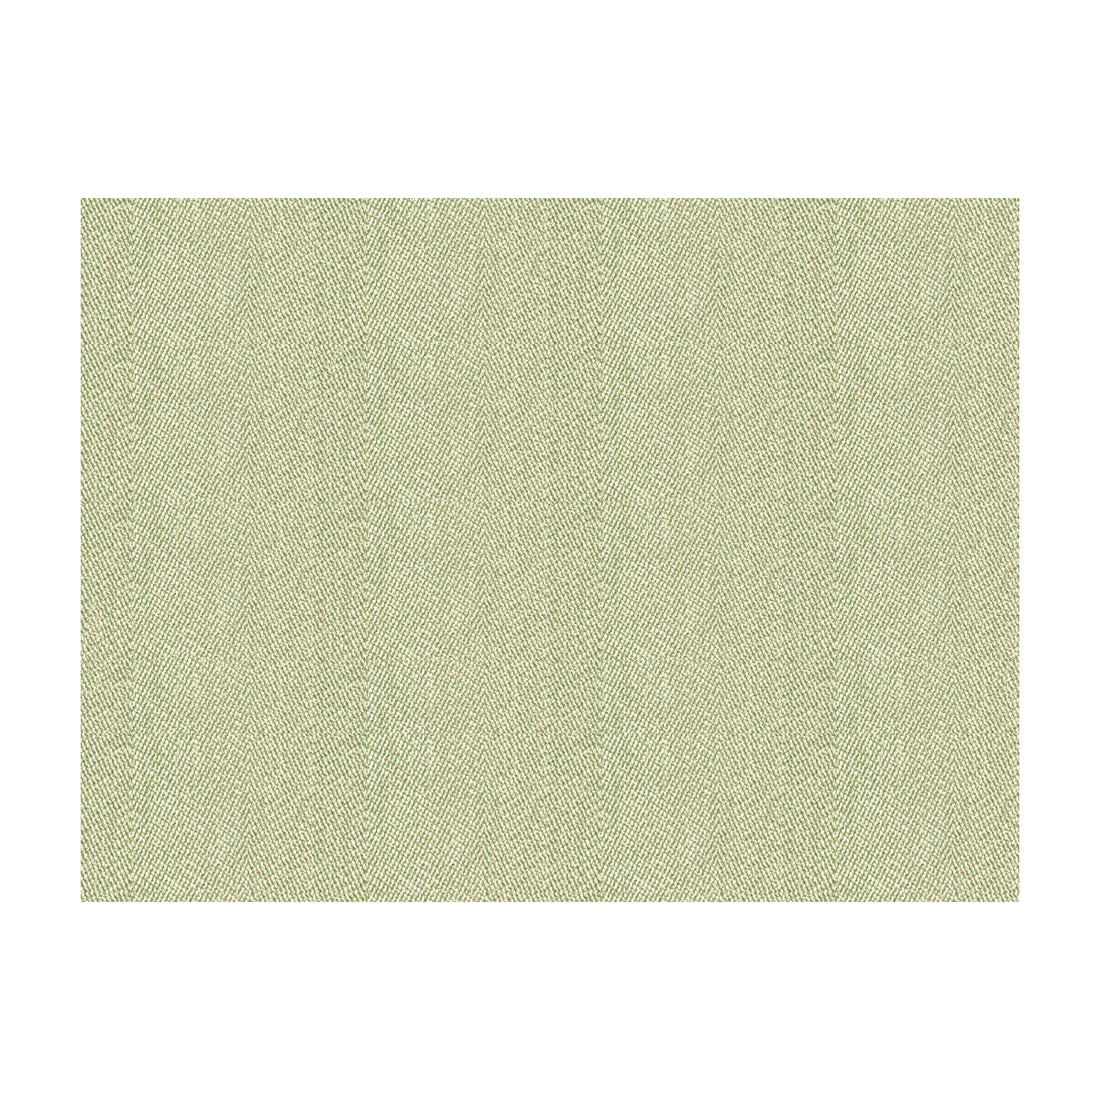 Kravet Contract fabric in 33877-23 color - pattern 33877.23.0 - by Kravet Contract in the Crypton Incase collection